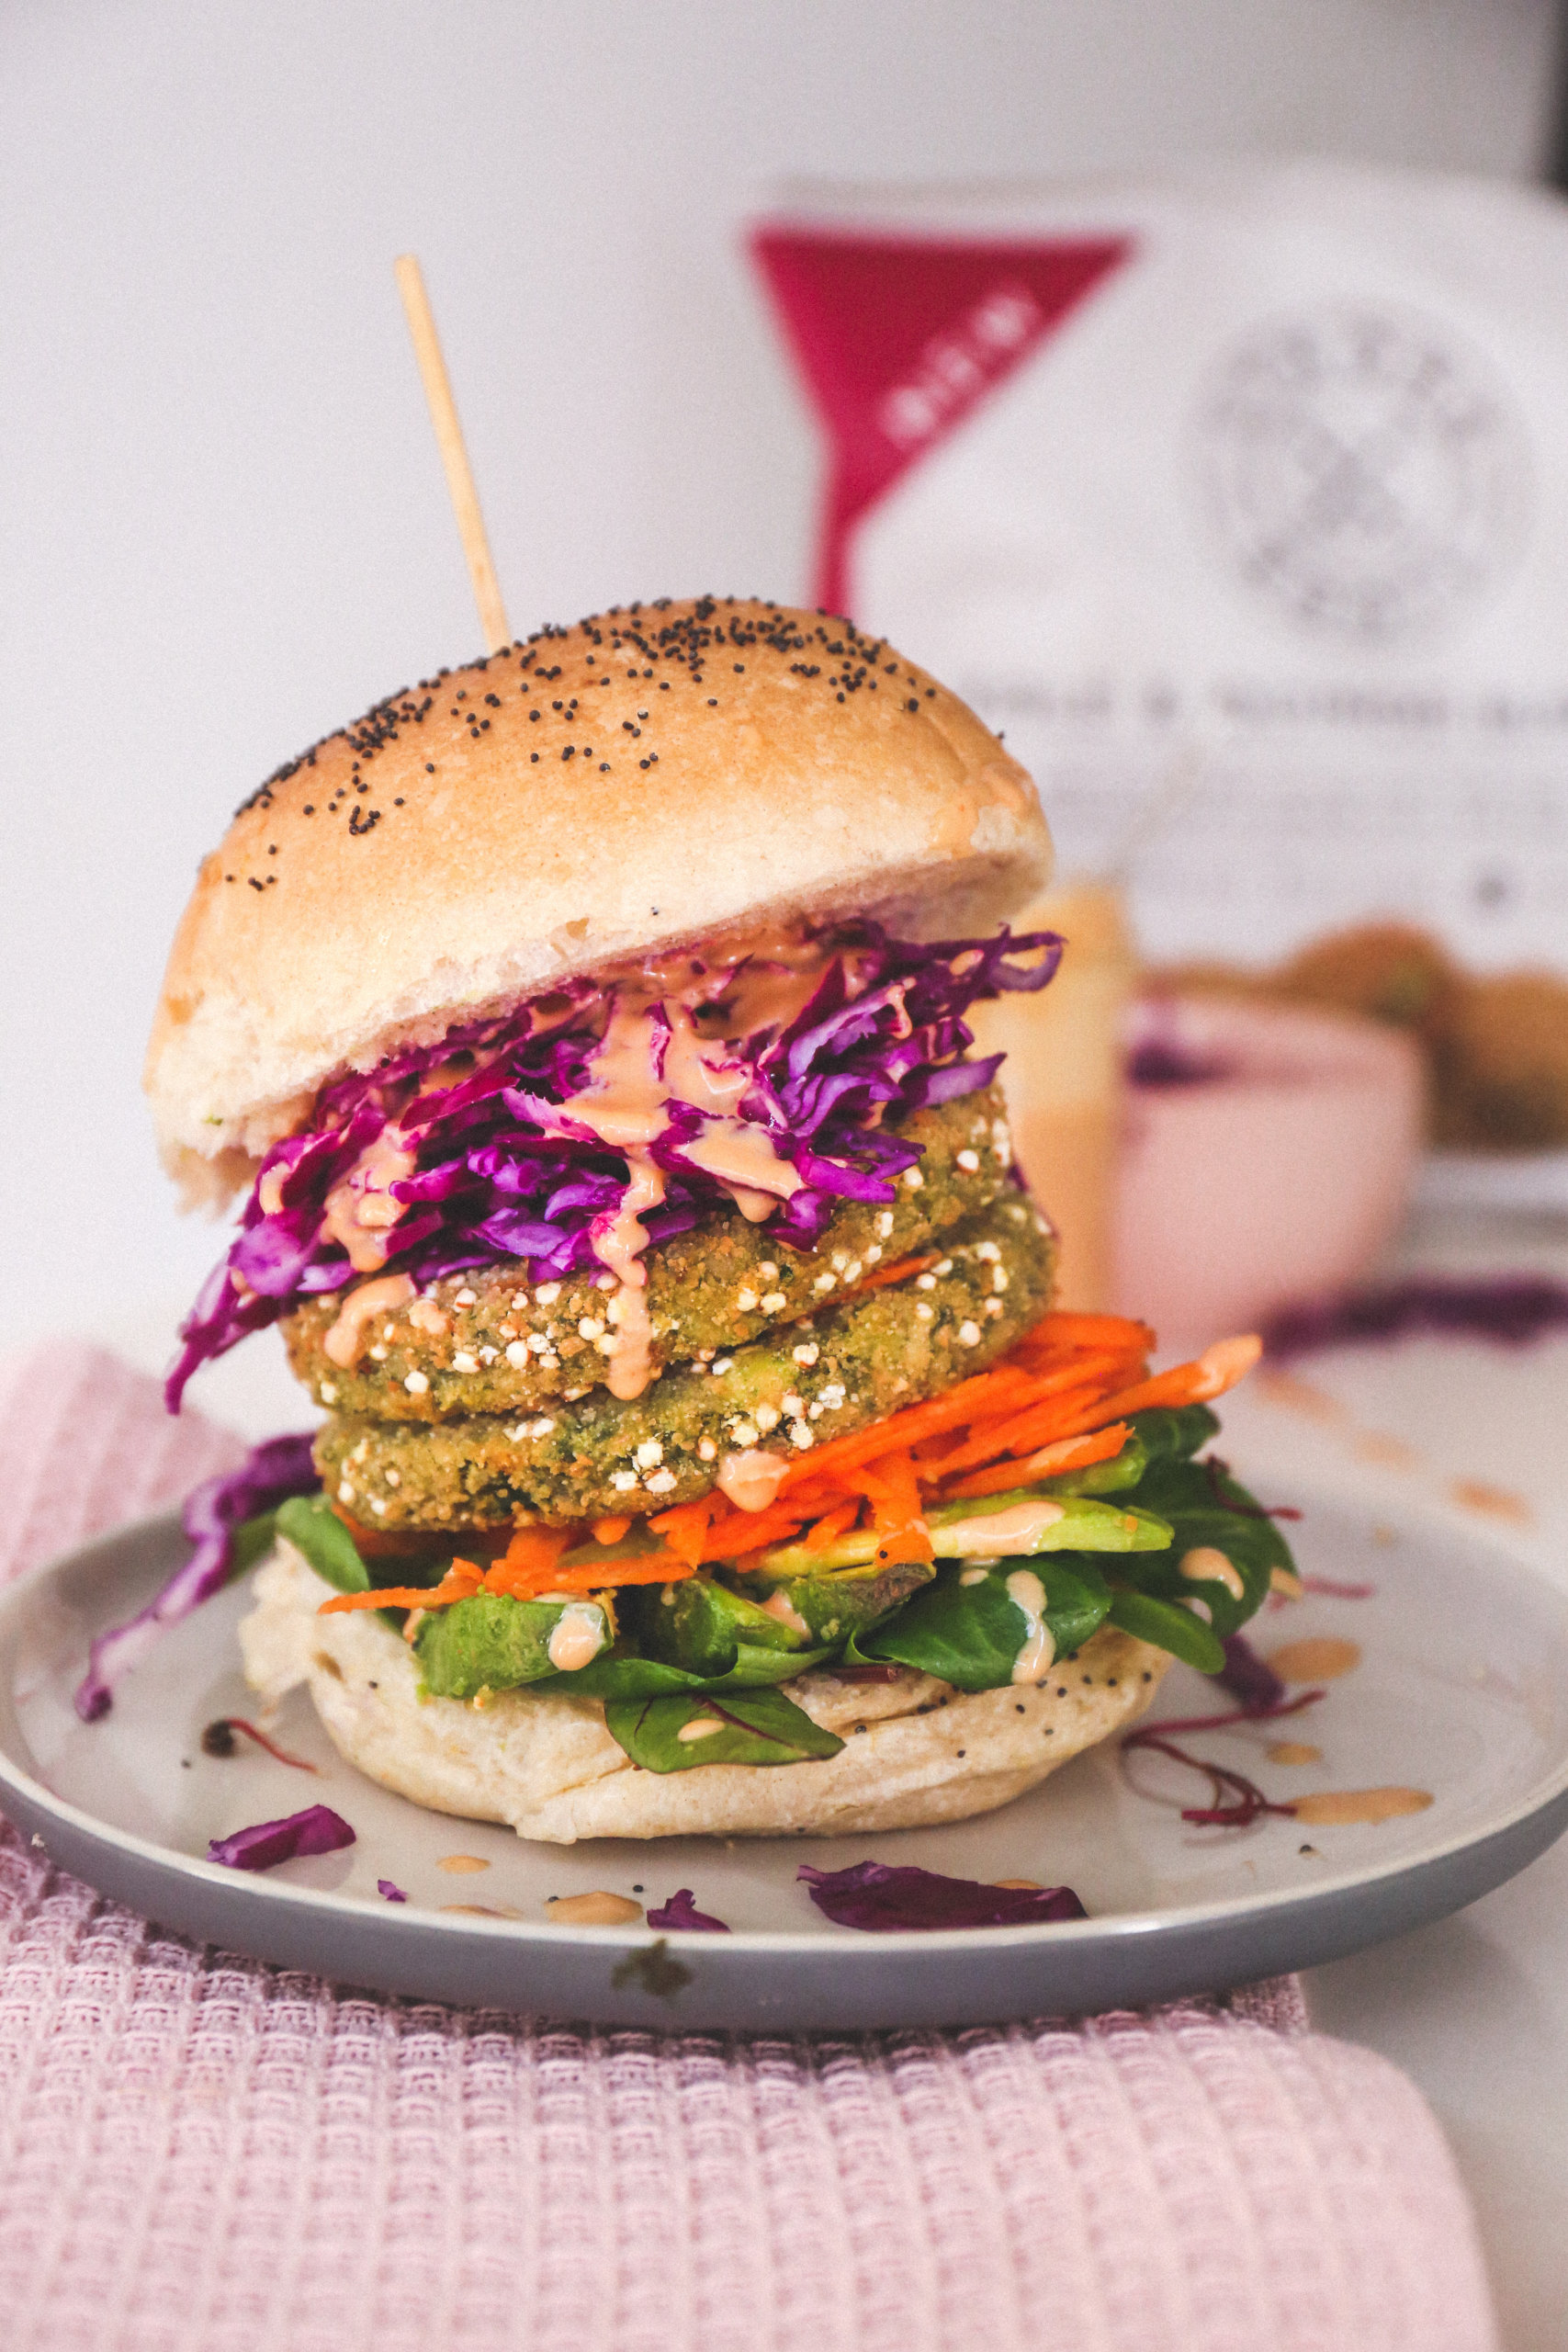 Loaded KALE & QUINOA BURGER with spicy slaw